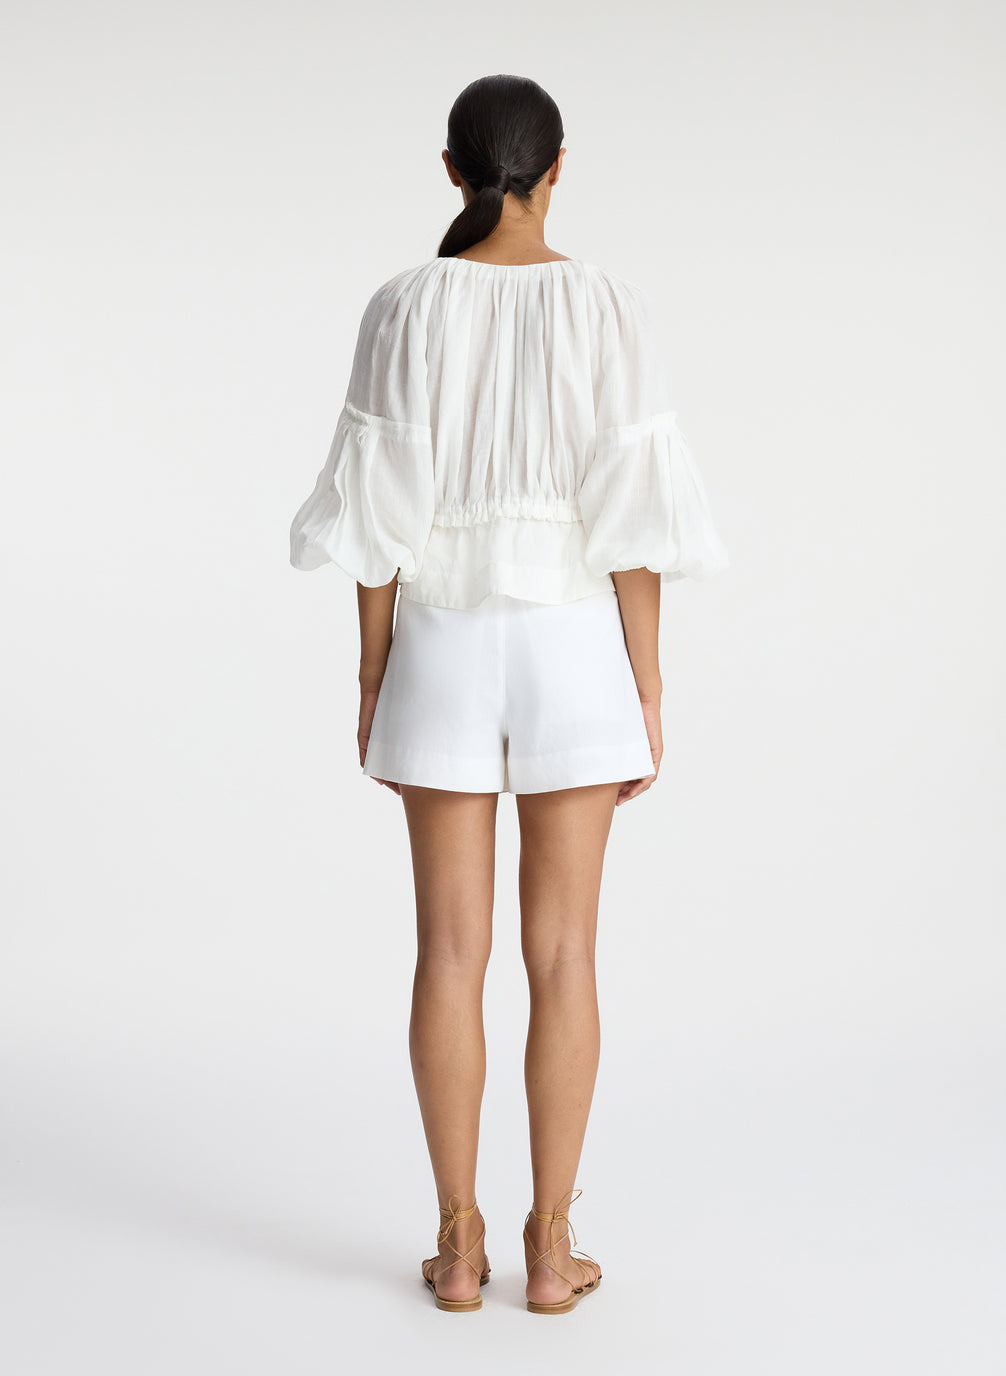 back view of woman wearing white blouse and white shorts